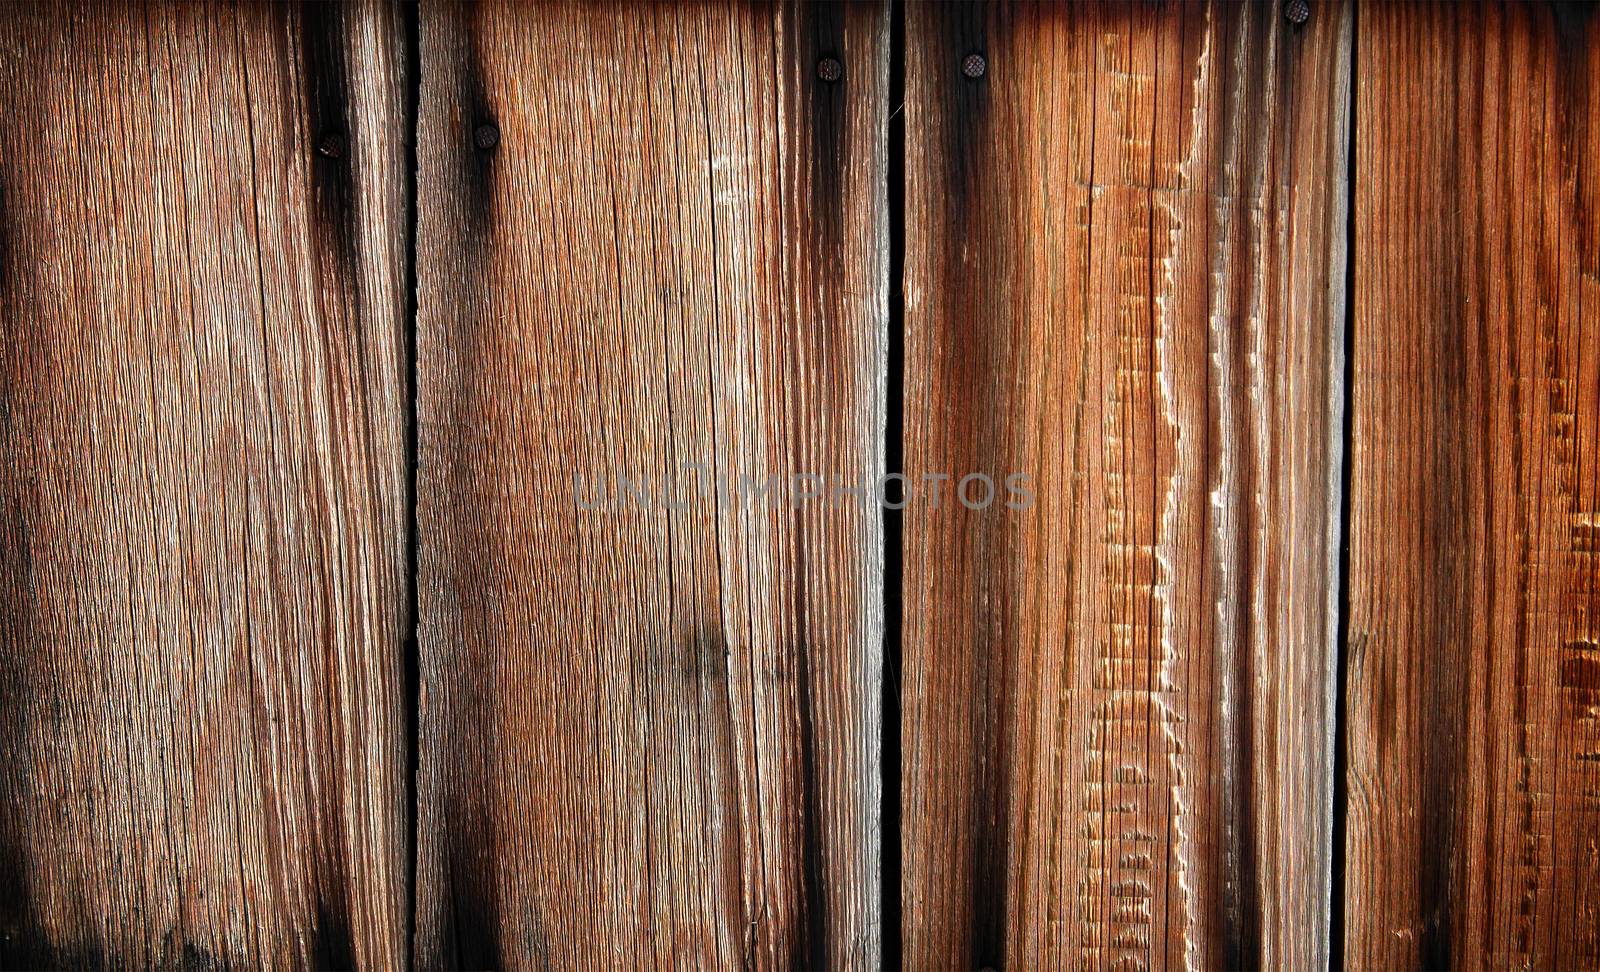 Old and Vintage Wooden planks Texture